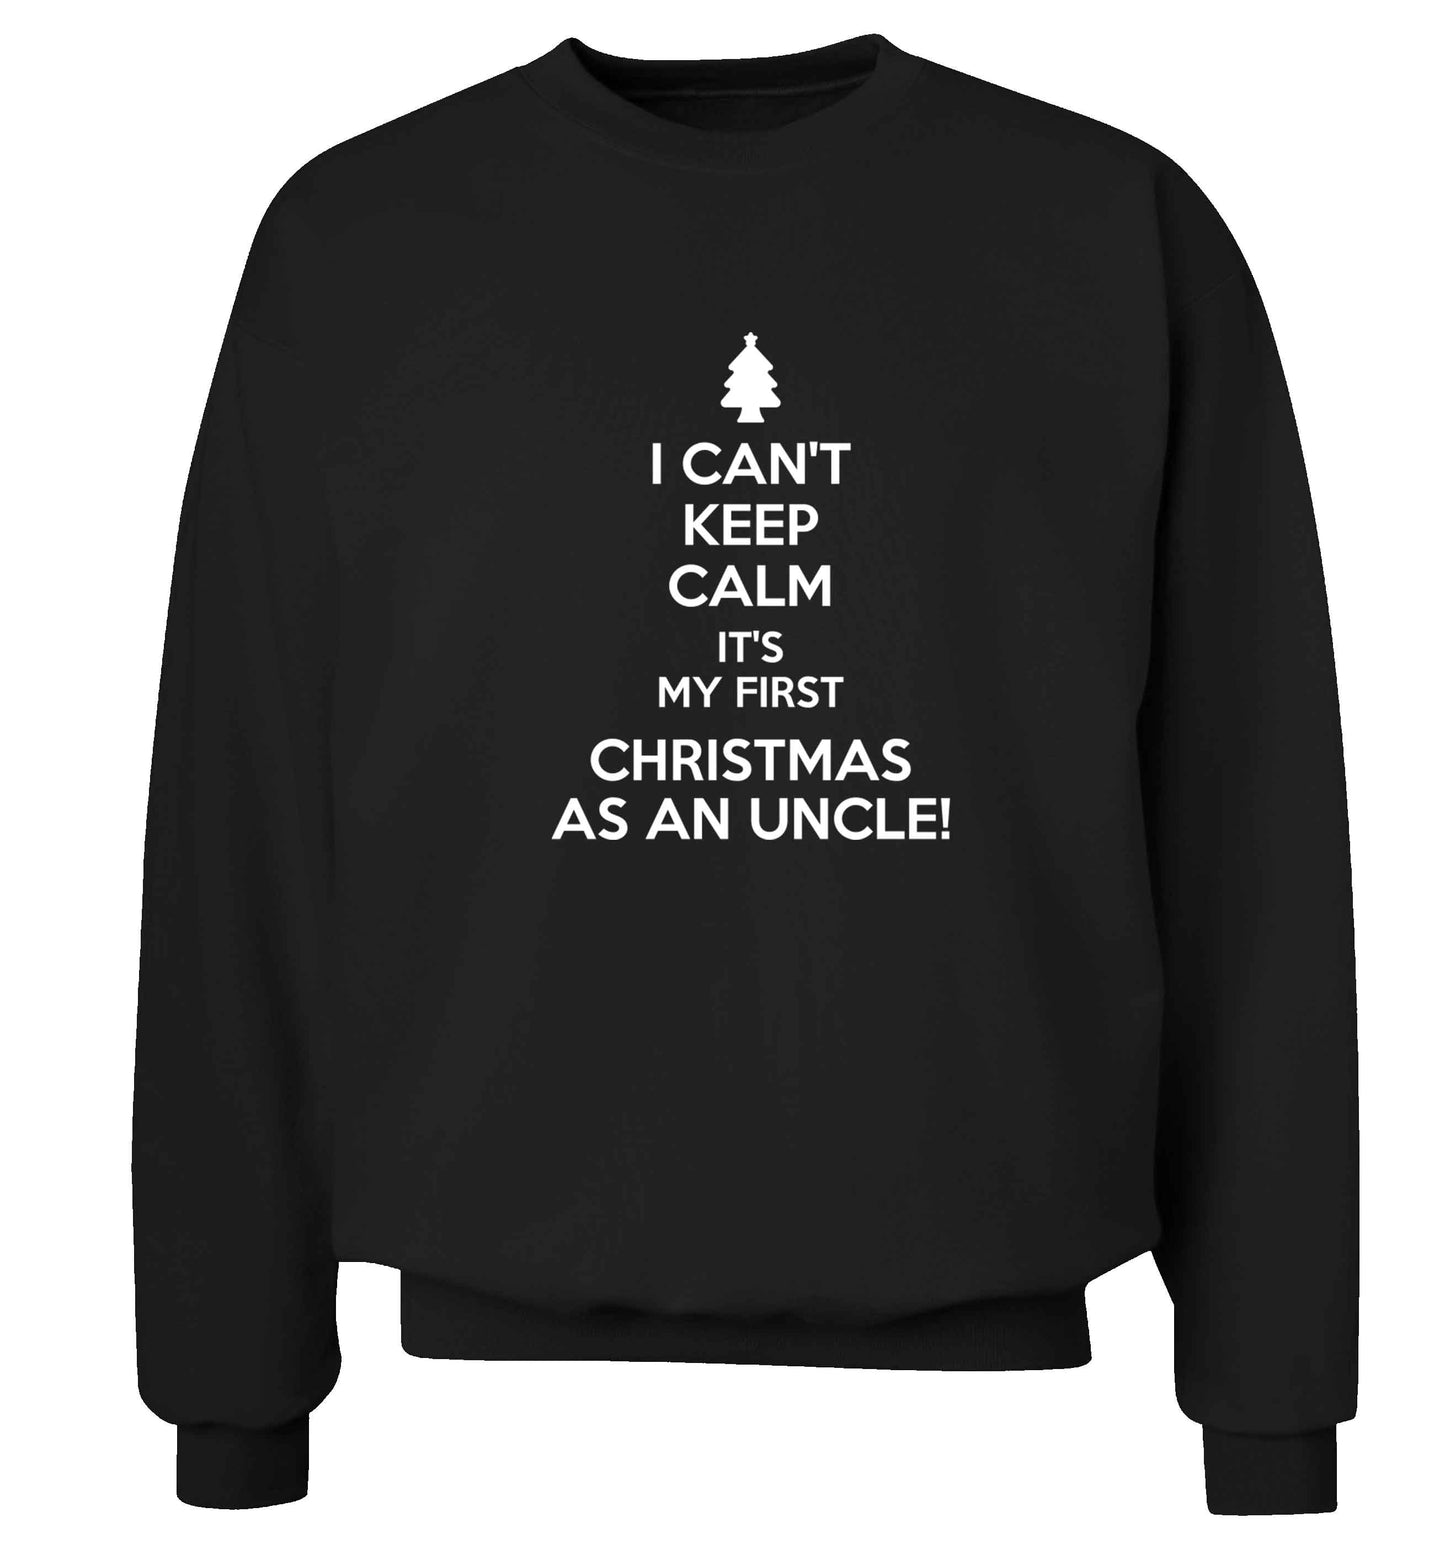 I can't keep calm it's my first Christmas as an uncle! Adult's unisex black Sweater 2XL